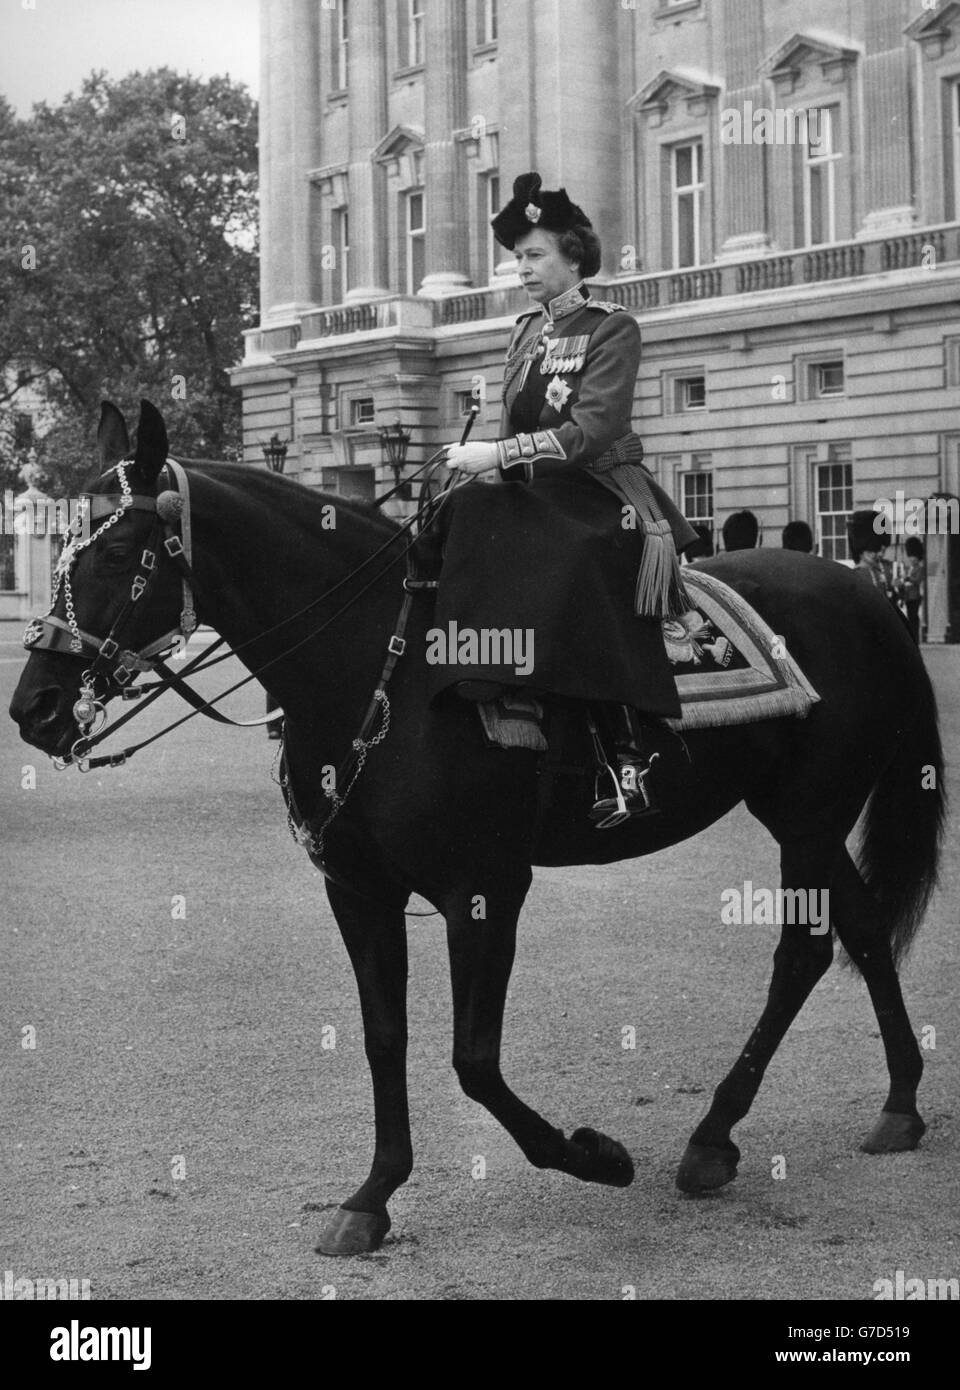 Royalty - Queen Elizabeth II - Trooping the Colour - Buckingham Palace, London Stock Photo